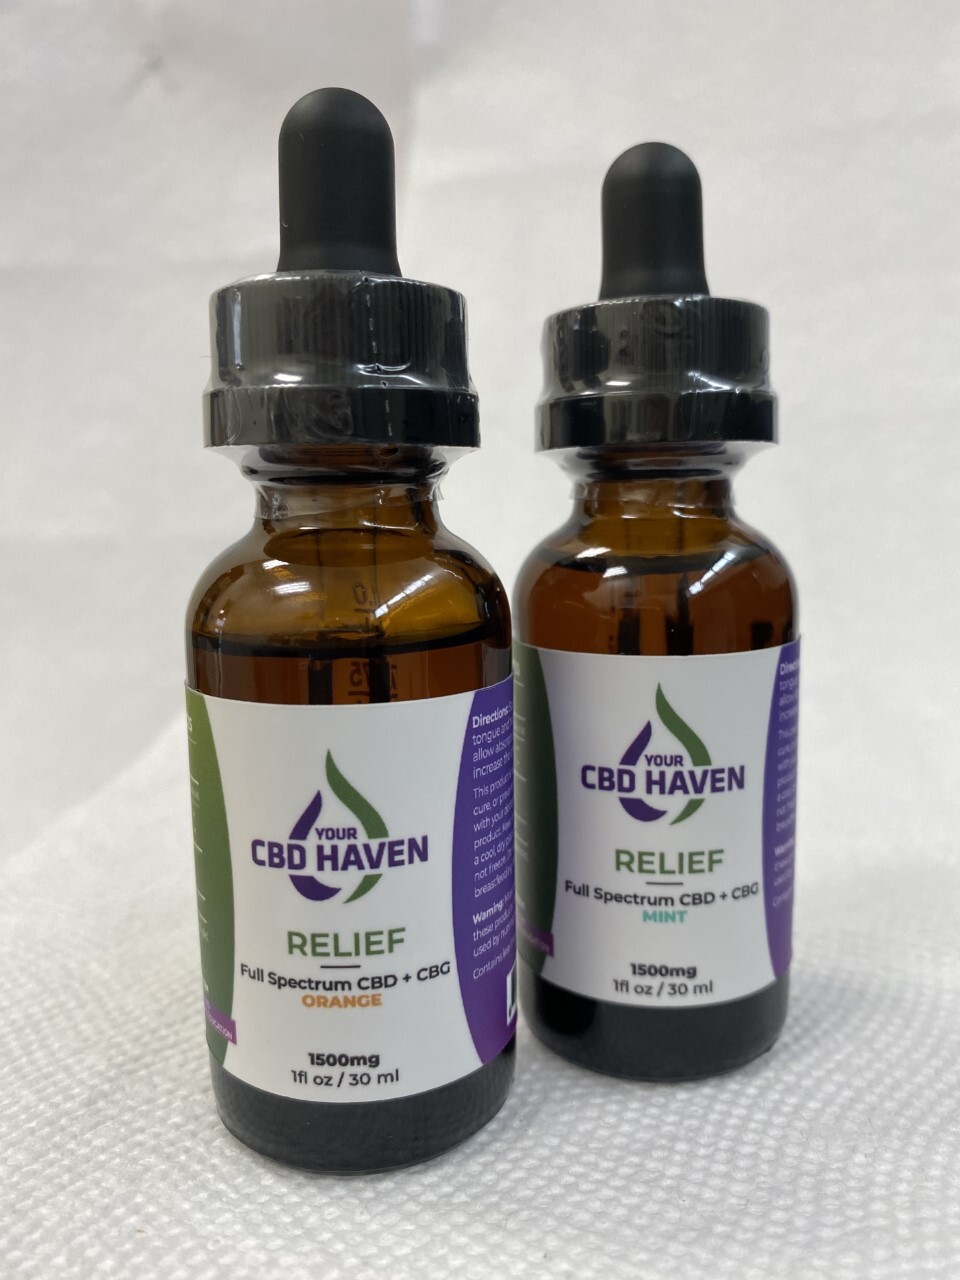 All Products | Your CBD Haven | Quality CBD Products, Education 